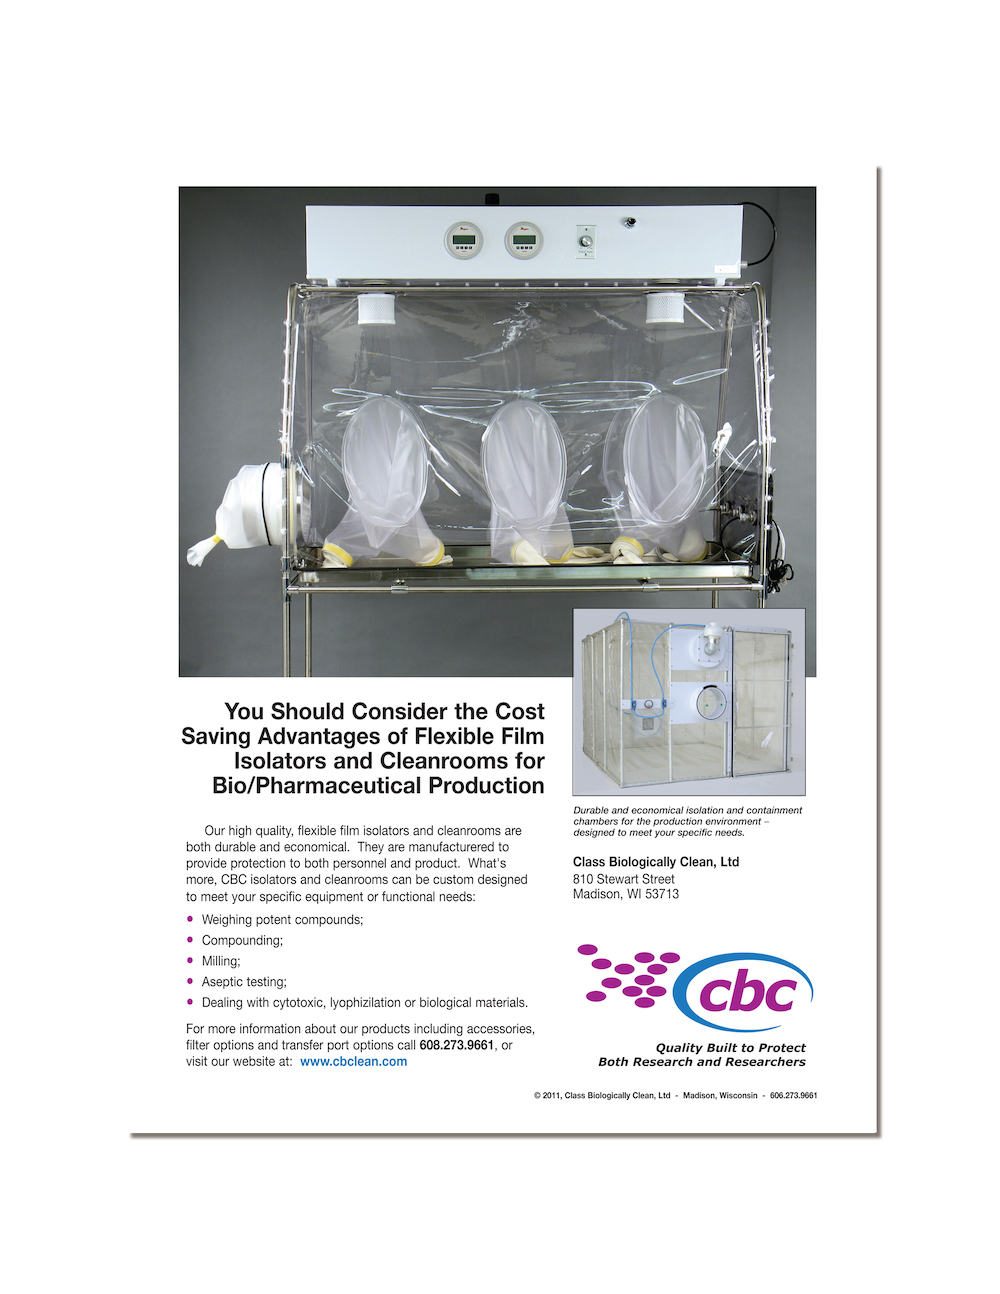 Download a printable flyer about the CBC Flexible Film Barrier and/or Containment Isolators for Bio/Pharmaceutical Production. Click here to download flyer.